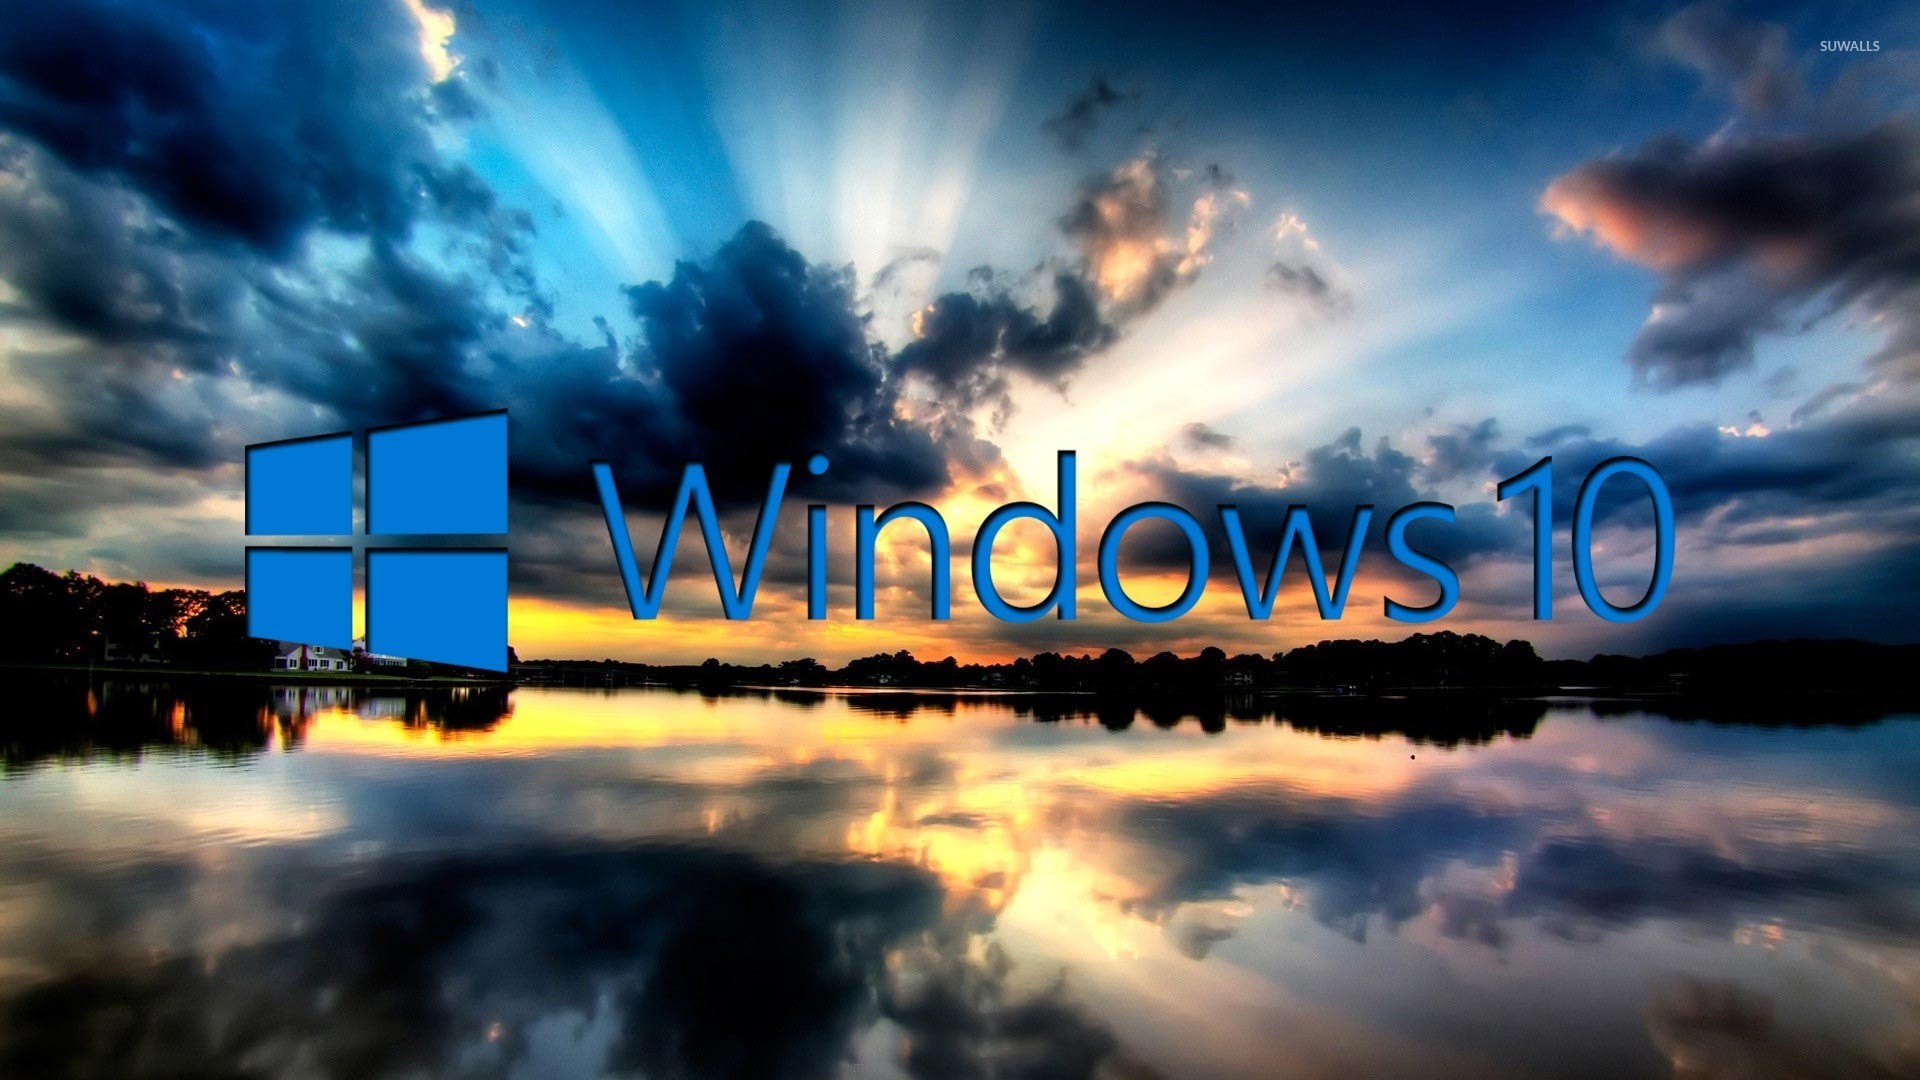 1920x1080 Windows 10 on the reflected clouds [3] wallpaper